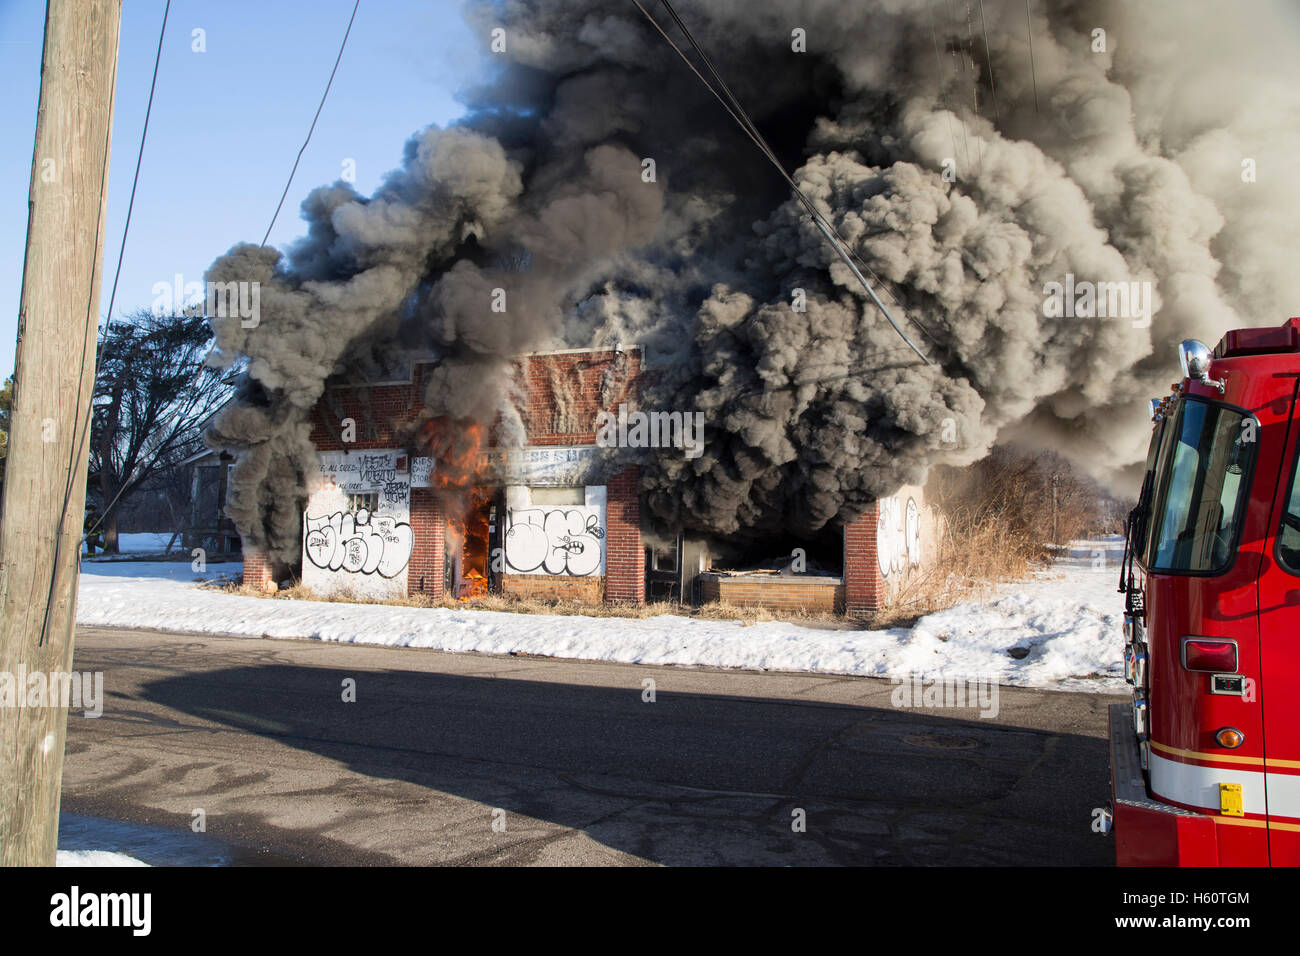 Arson fire in vacant commercial building, Detroit, Michigan USA Stock Photo